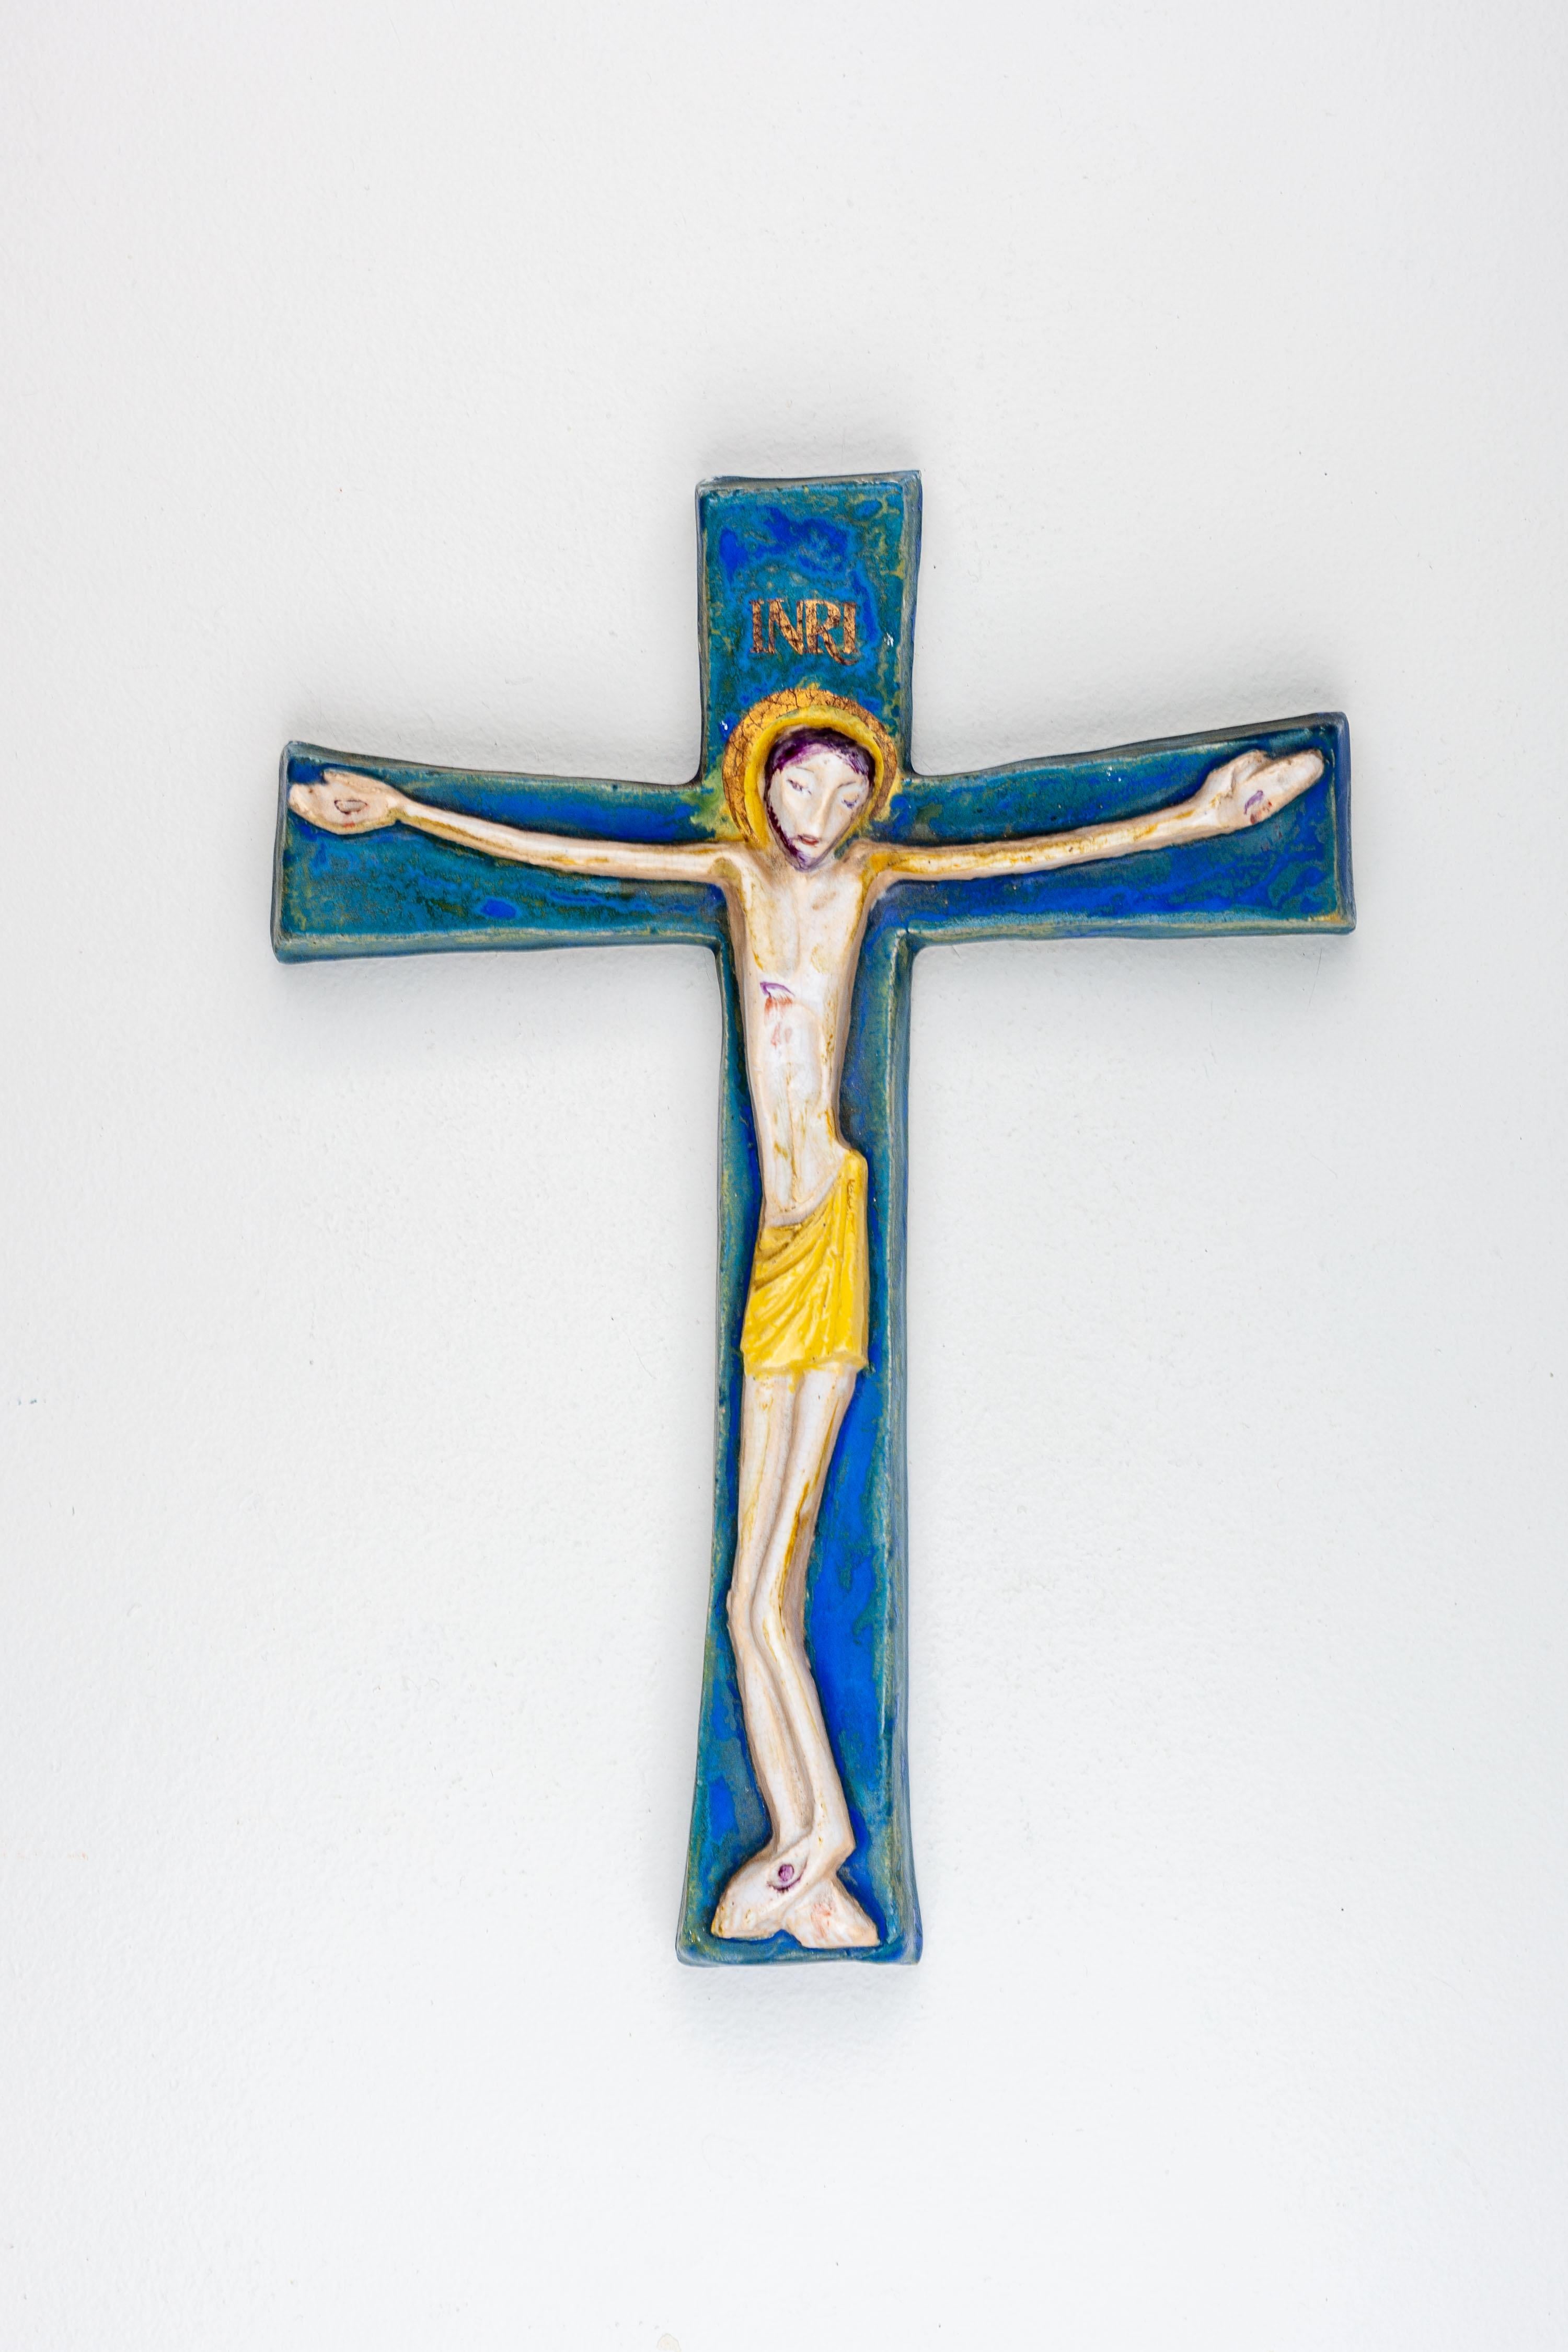 Modernist Cobalt Blue and Gold Wall Cross - European Studio Pottery Masterpiece For Sale 2